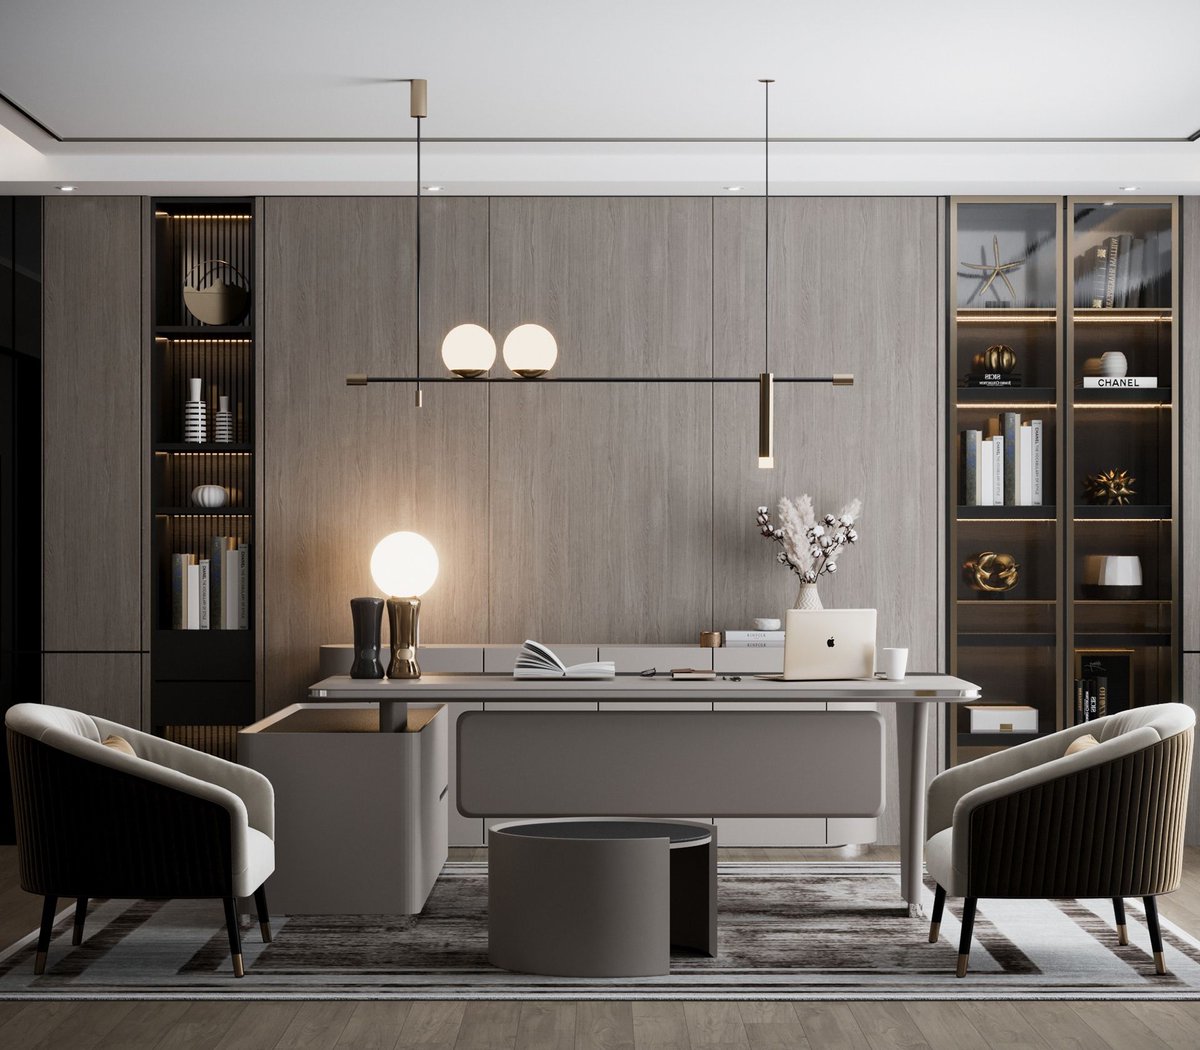 Embrace the perfect blend of sophistication and warmth with this stunning grey and wood office interior. Elevate your workspace and inspire productivity in style. #OfficeDesign #GreyandWood #WorkspaceInspiration #InteriorDesign # #inspiration #oraanjinteriors#oraanj